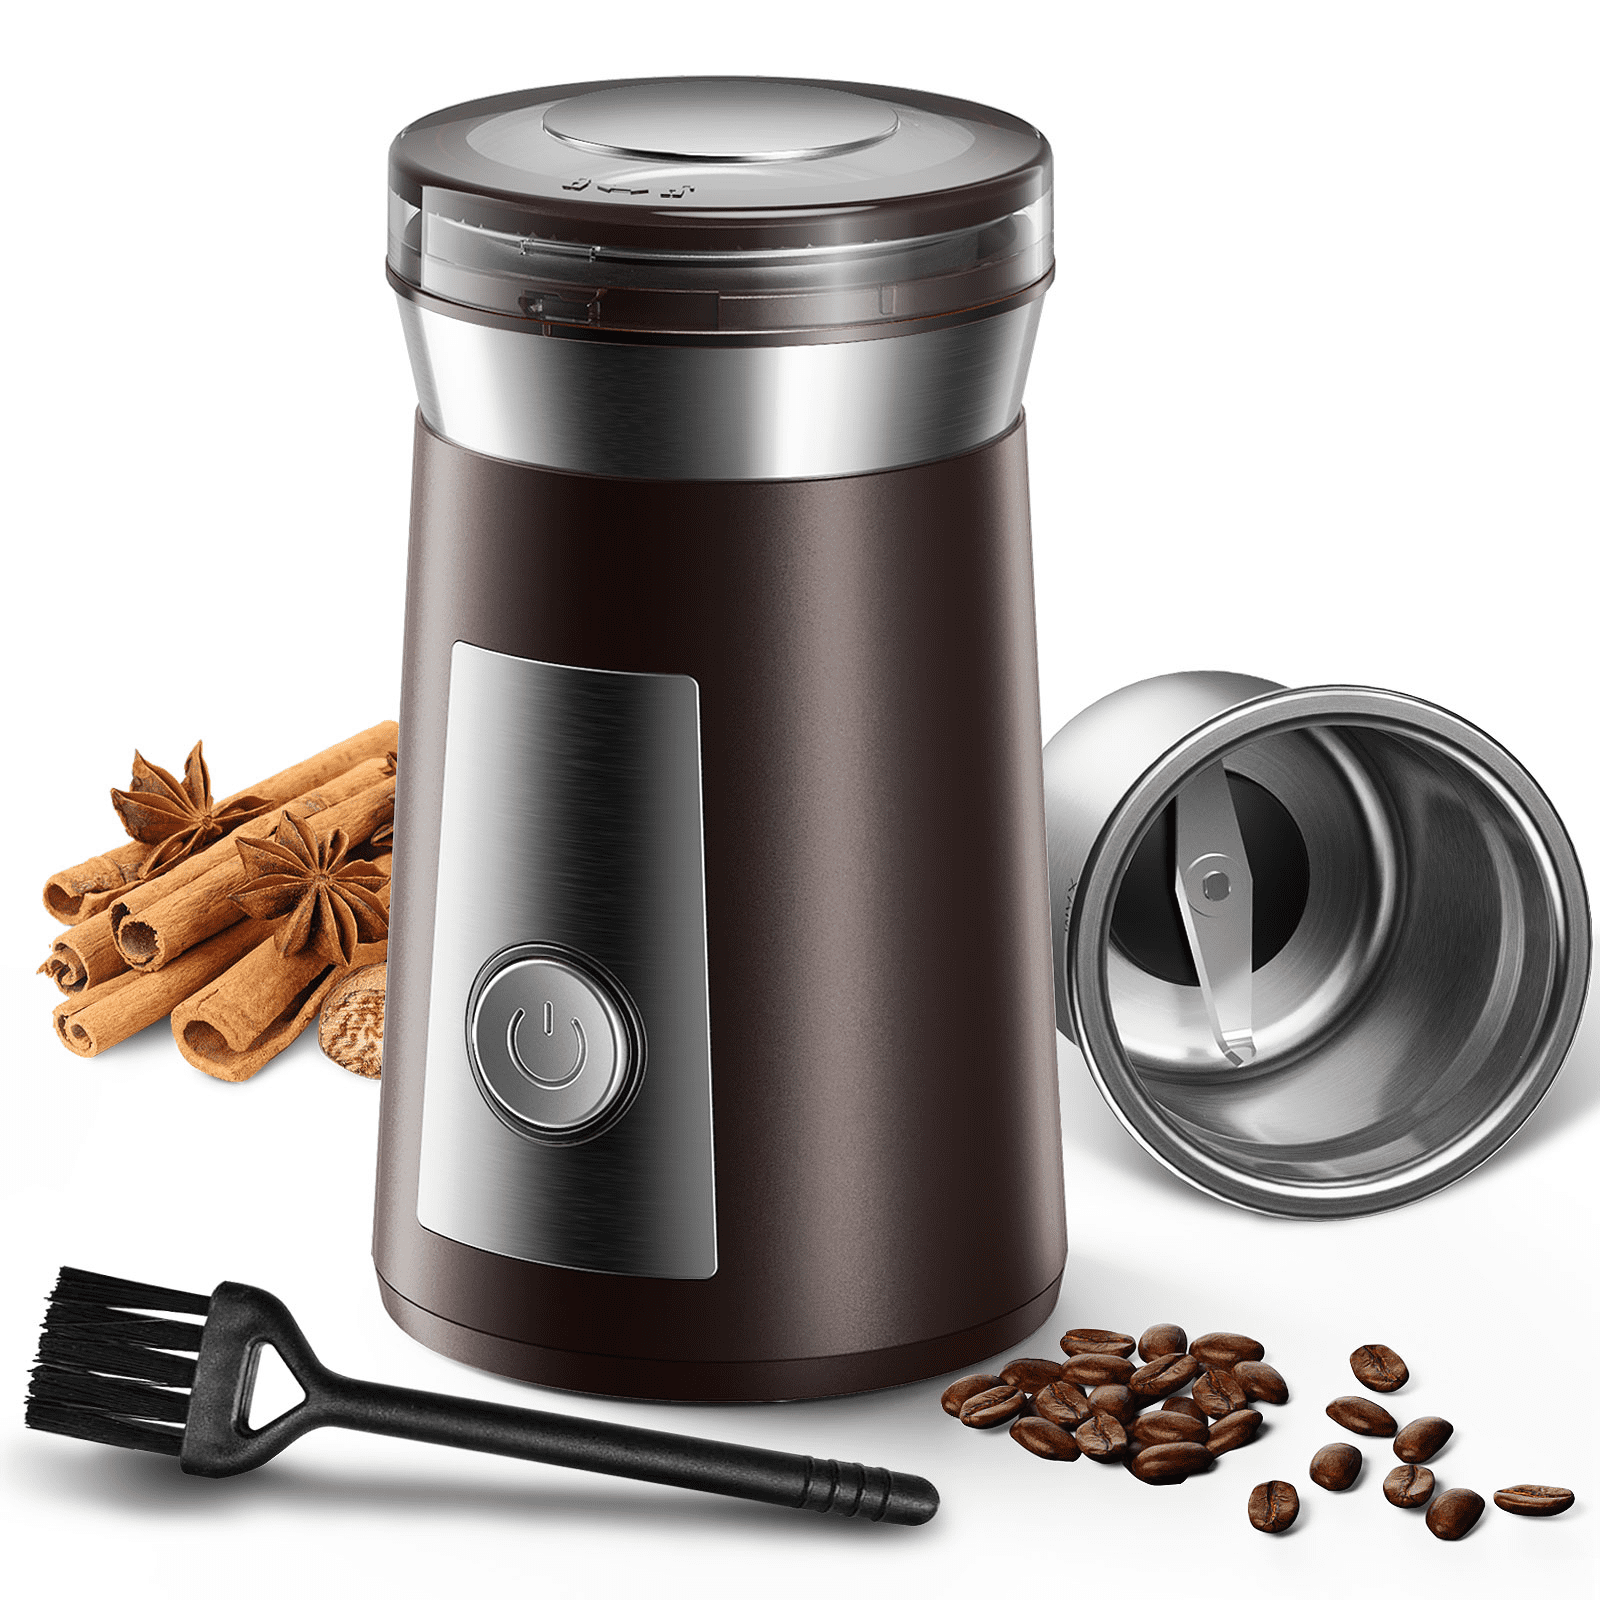 200 g Overheat Protection JIN Coffee Grinders Electric Spice Grains Mill Grinder with Stainless Steel Blade 300 W Motor,Blue for Dry or Wet Grinding 